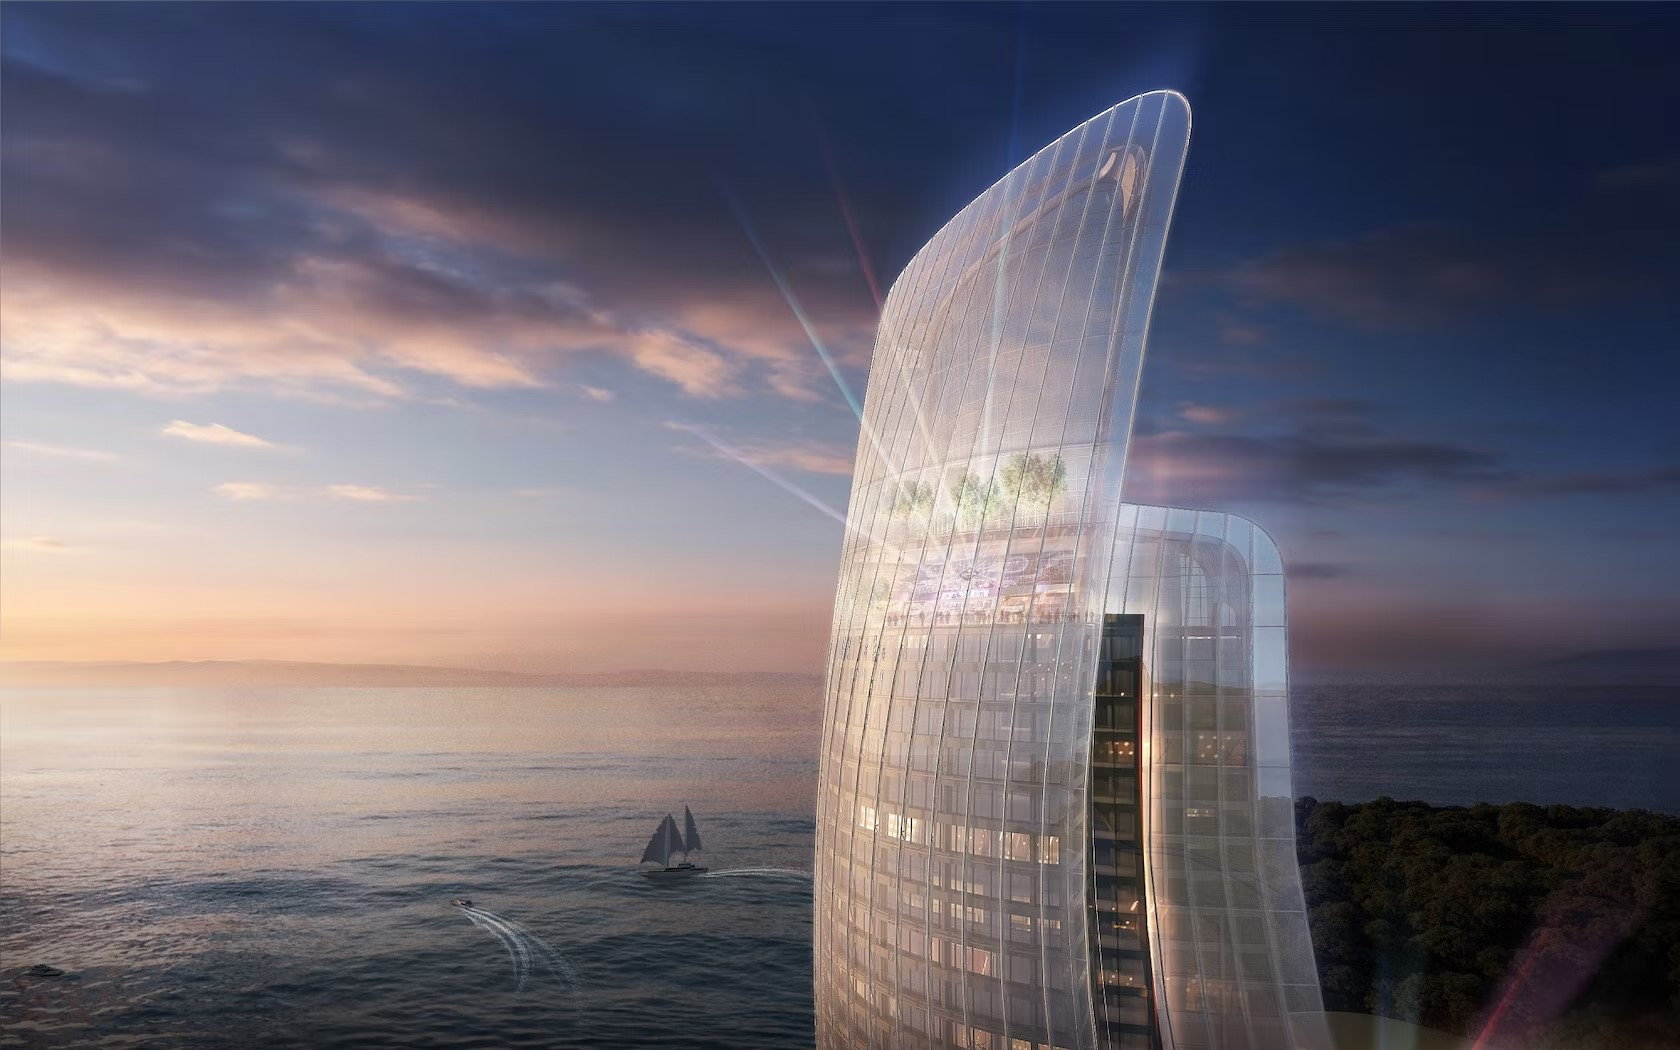 Thailand?s Latest Resort Looks Like the Billowing Sails of a Luxury Ship